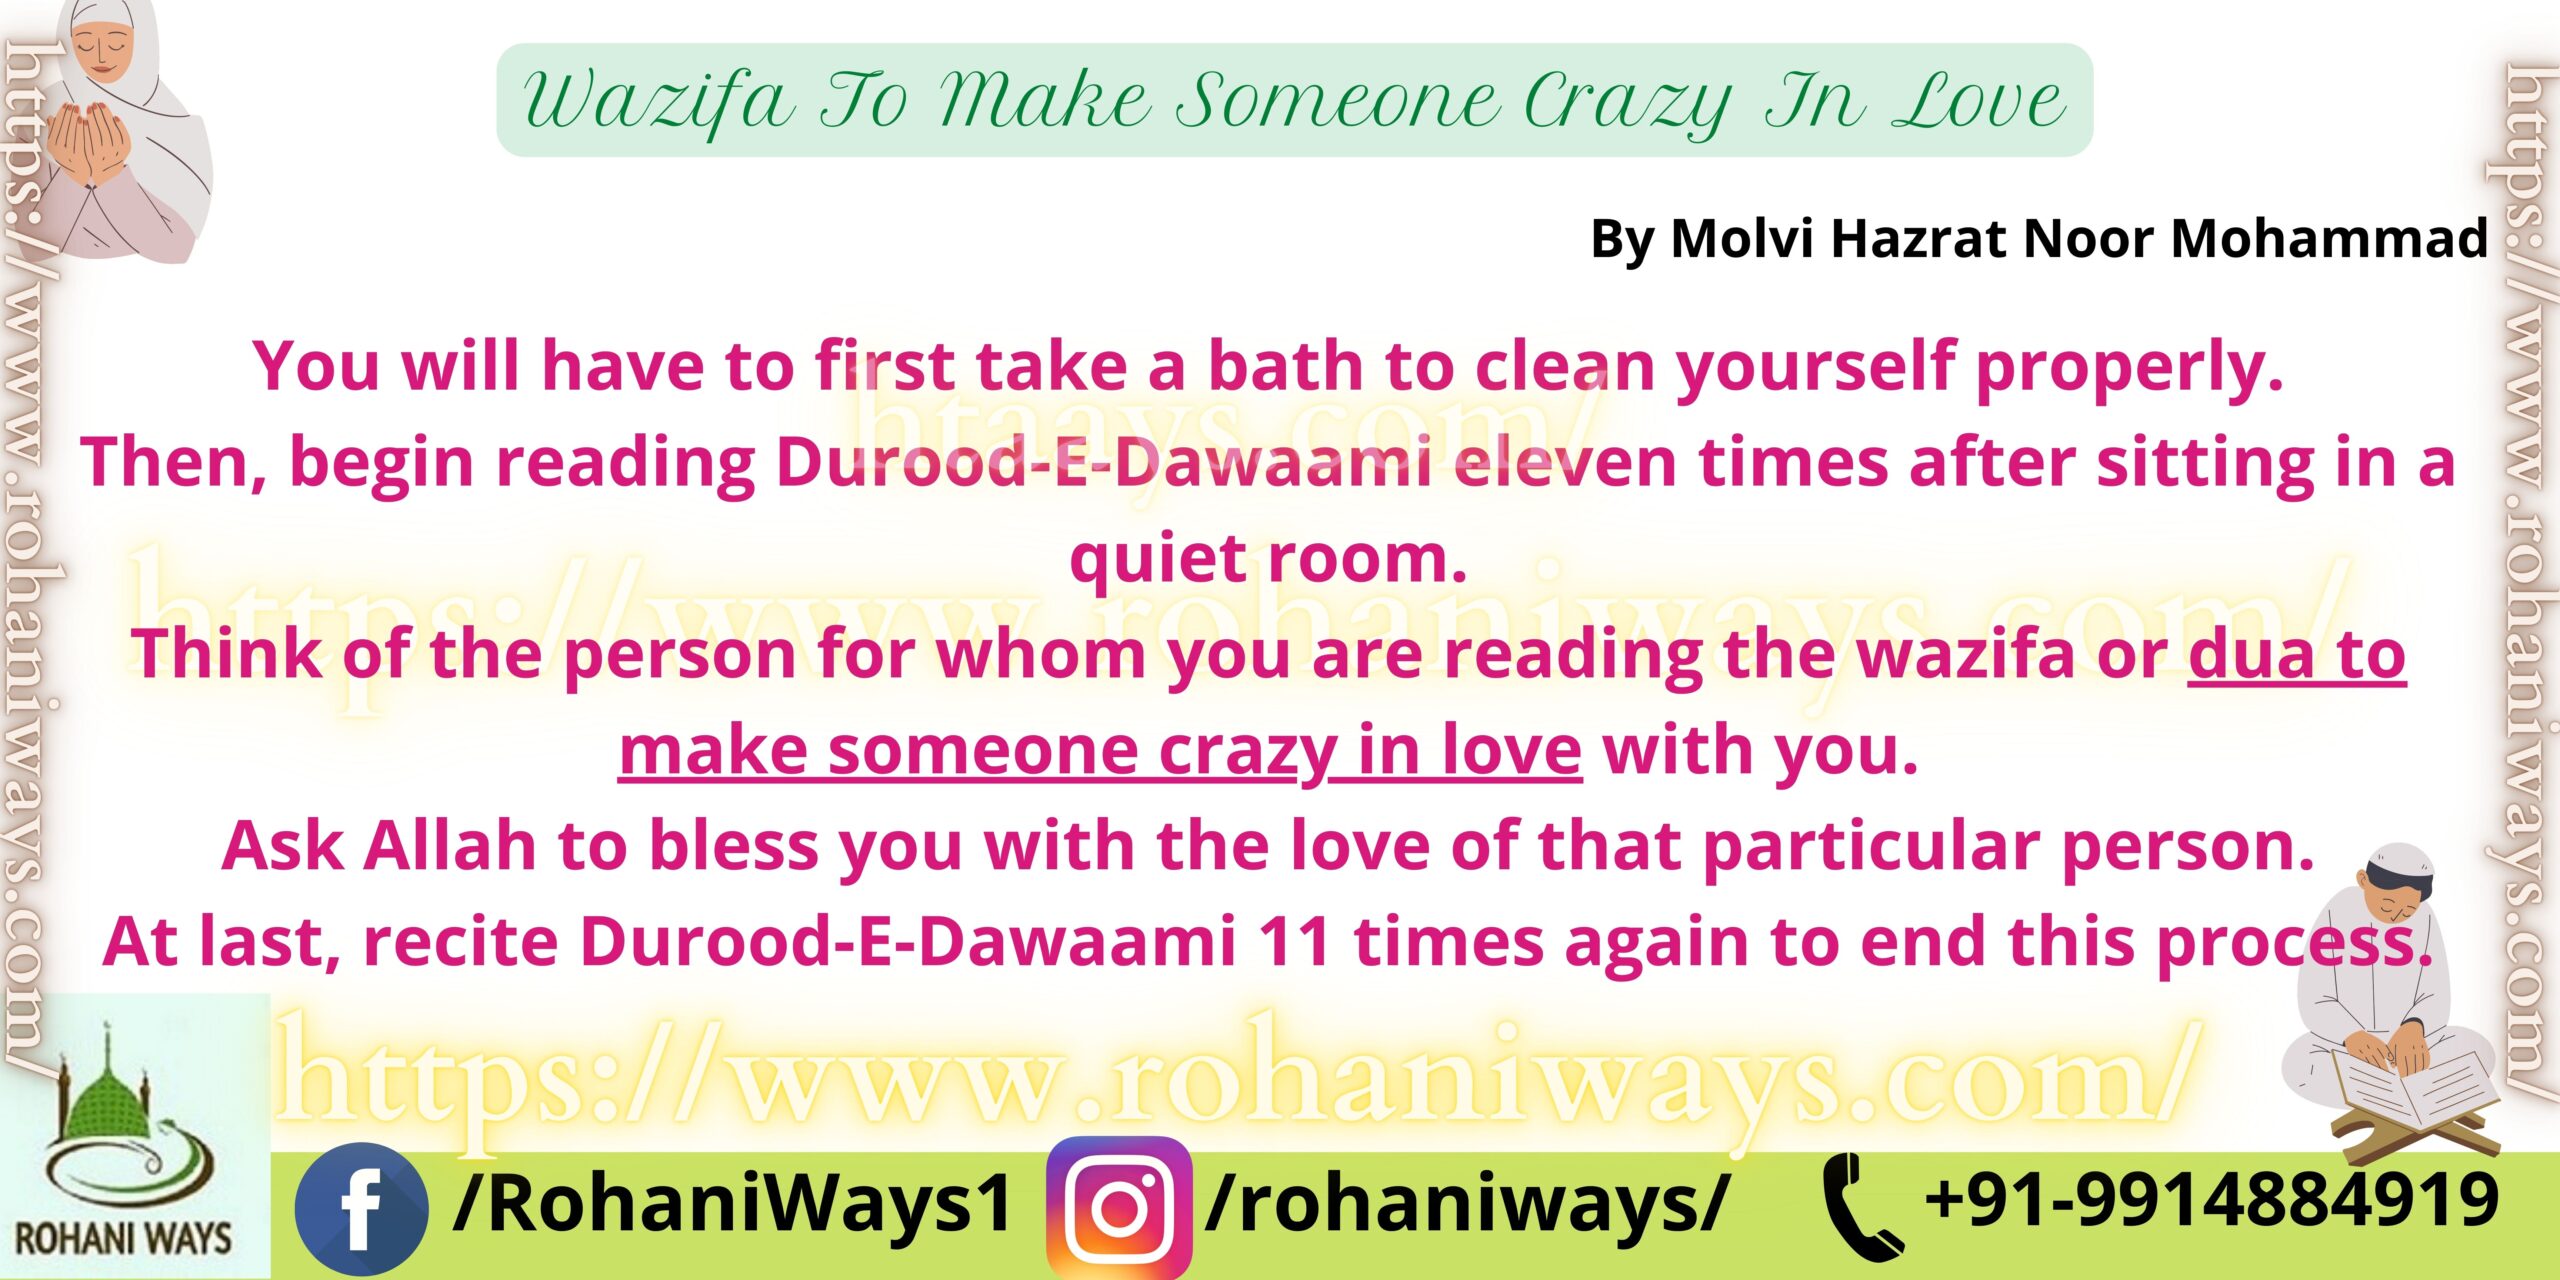 Wazifa To Make Someone Crazy In Love with you